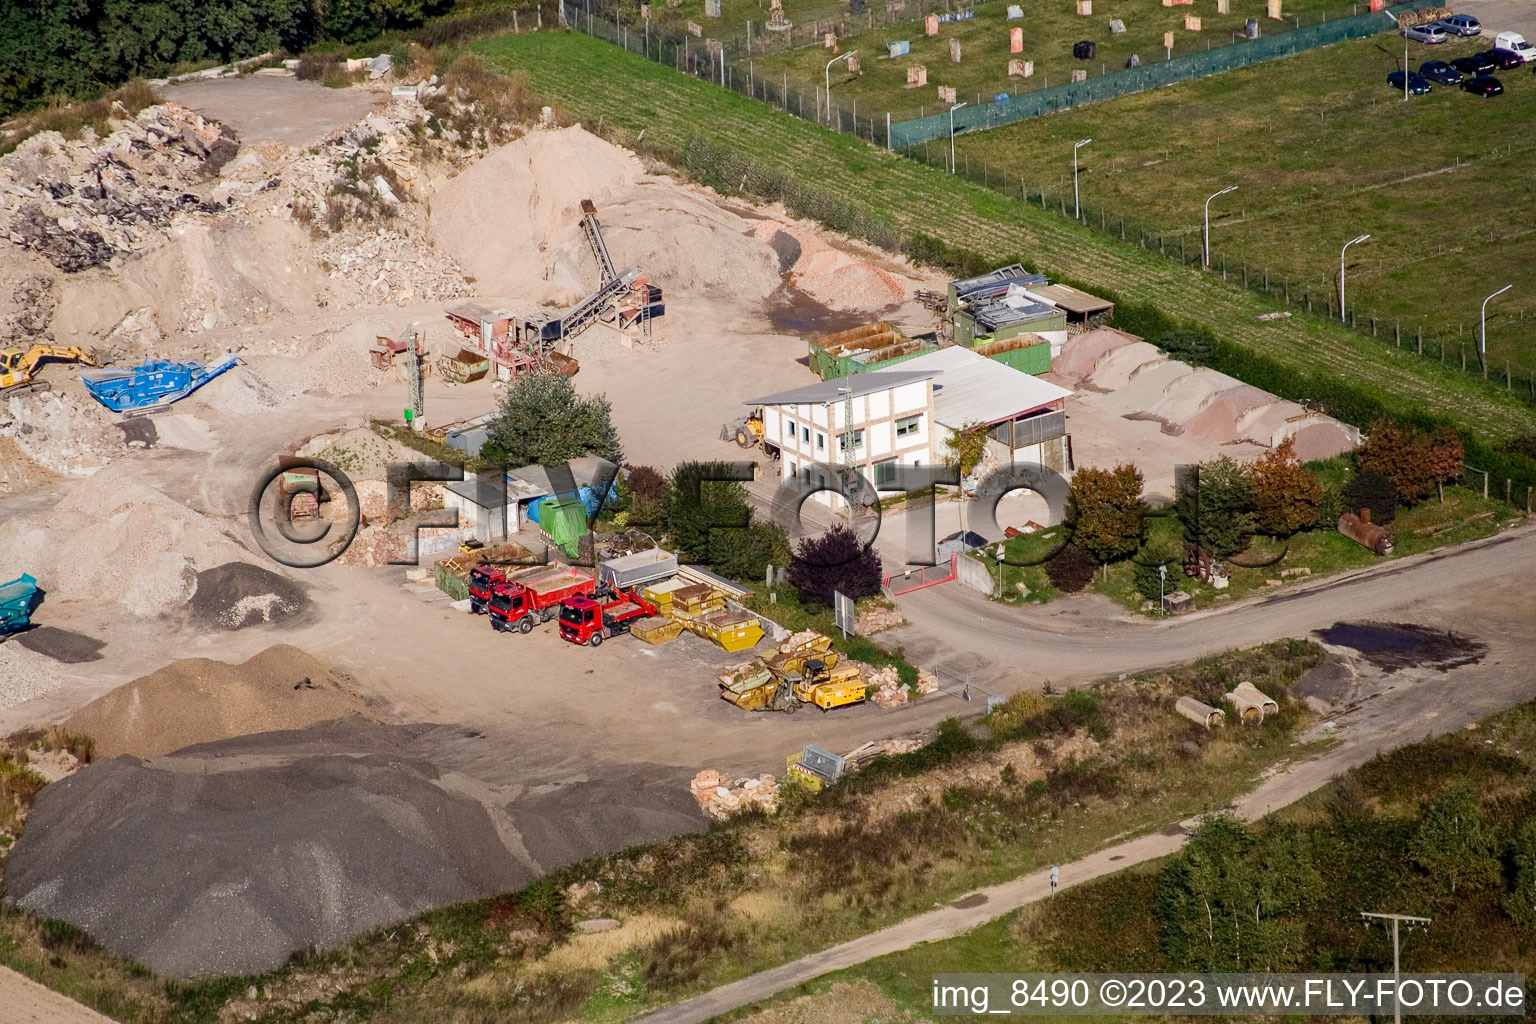 Construction waste recycling Gaudier in the district Minderslachen in Kandel in the state Rhineland-Palatinate, Germany seen from above